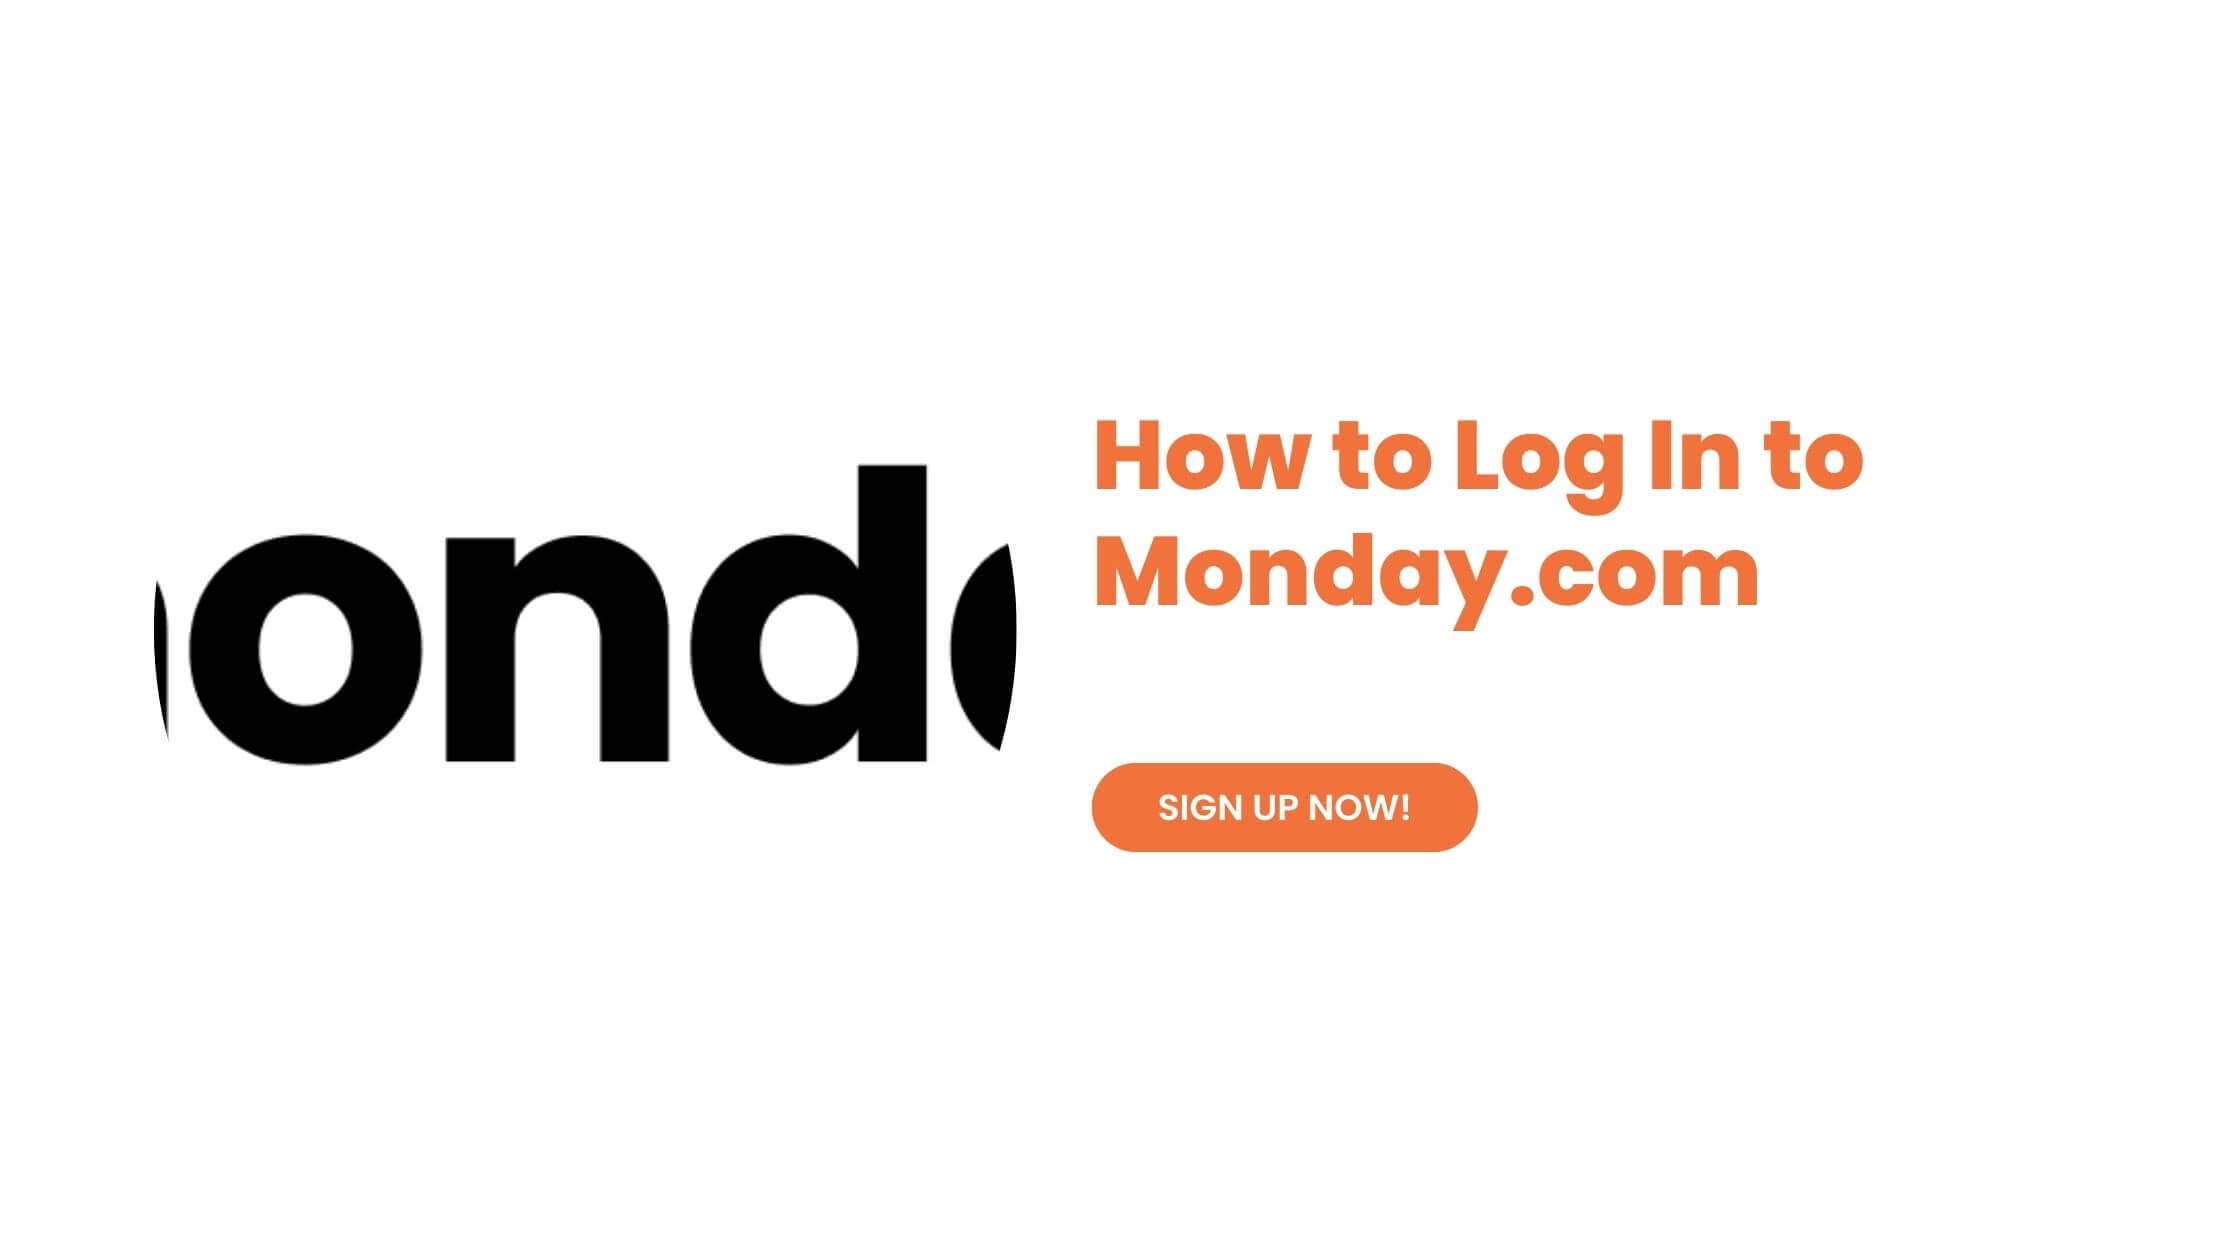 How to Log In to Monday.com